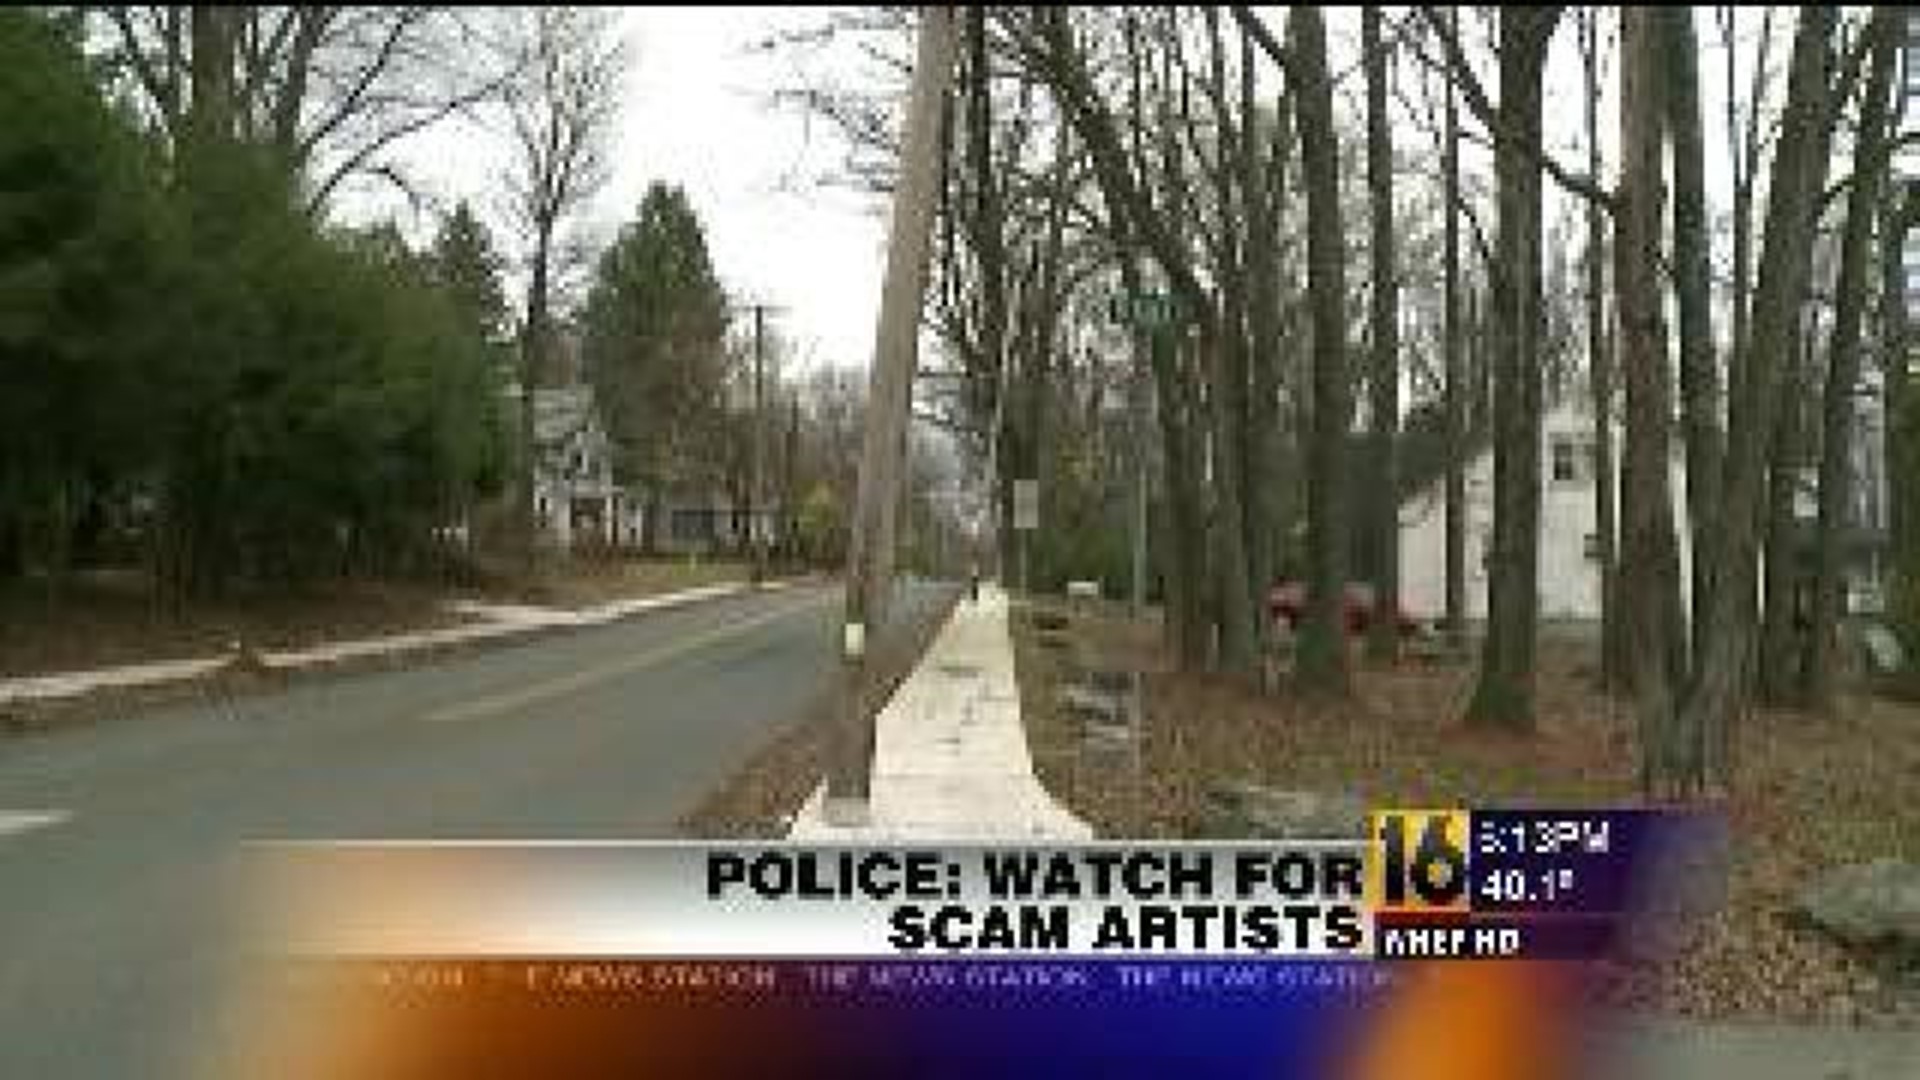 Police: Watch for Scam Artists